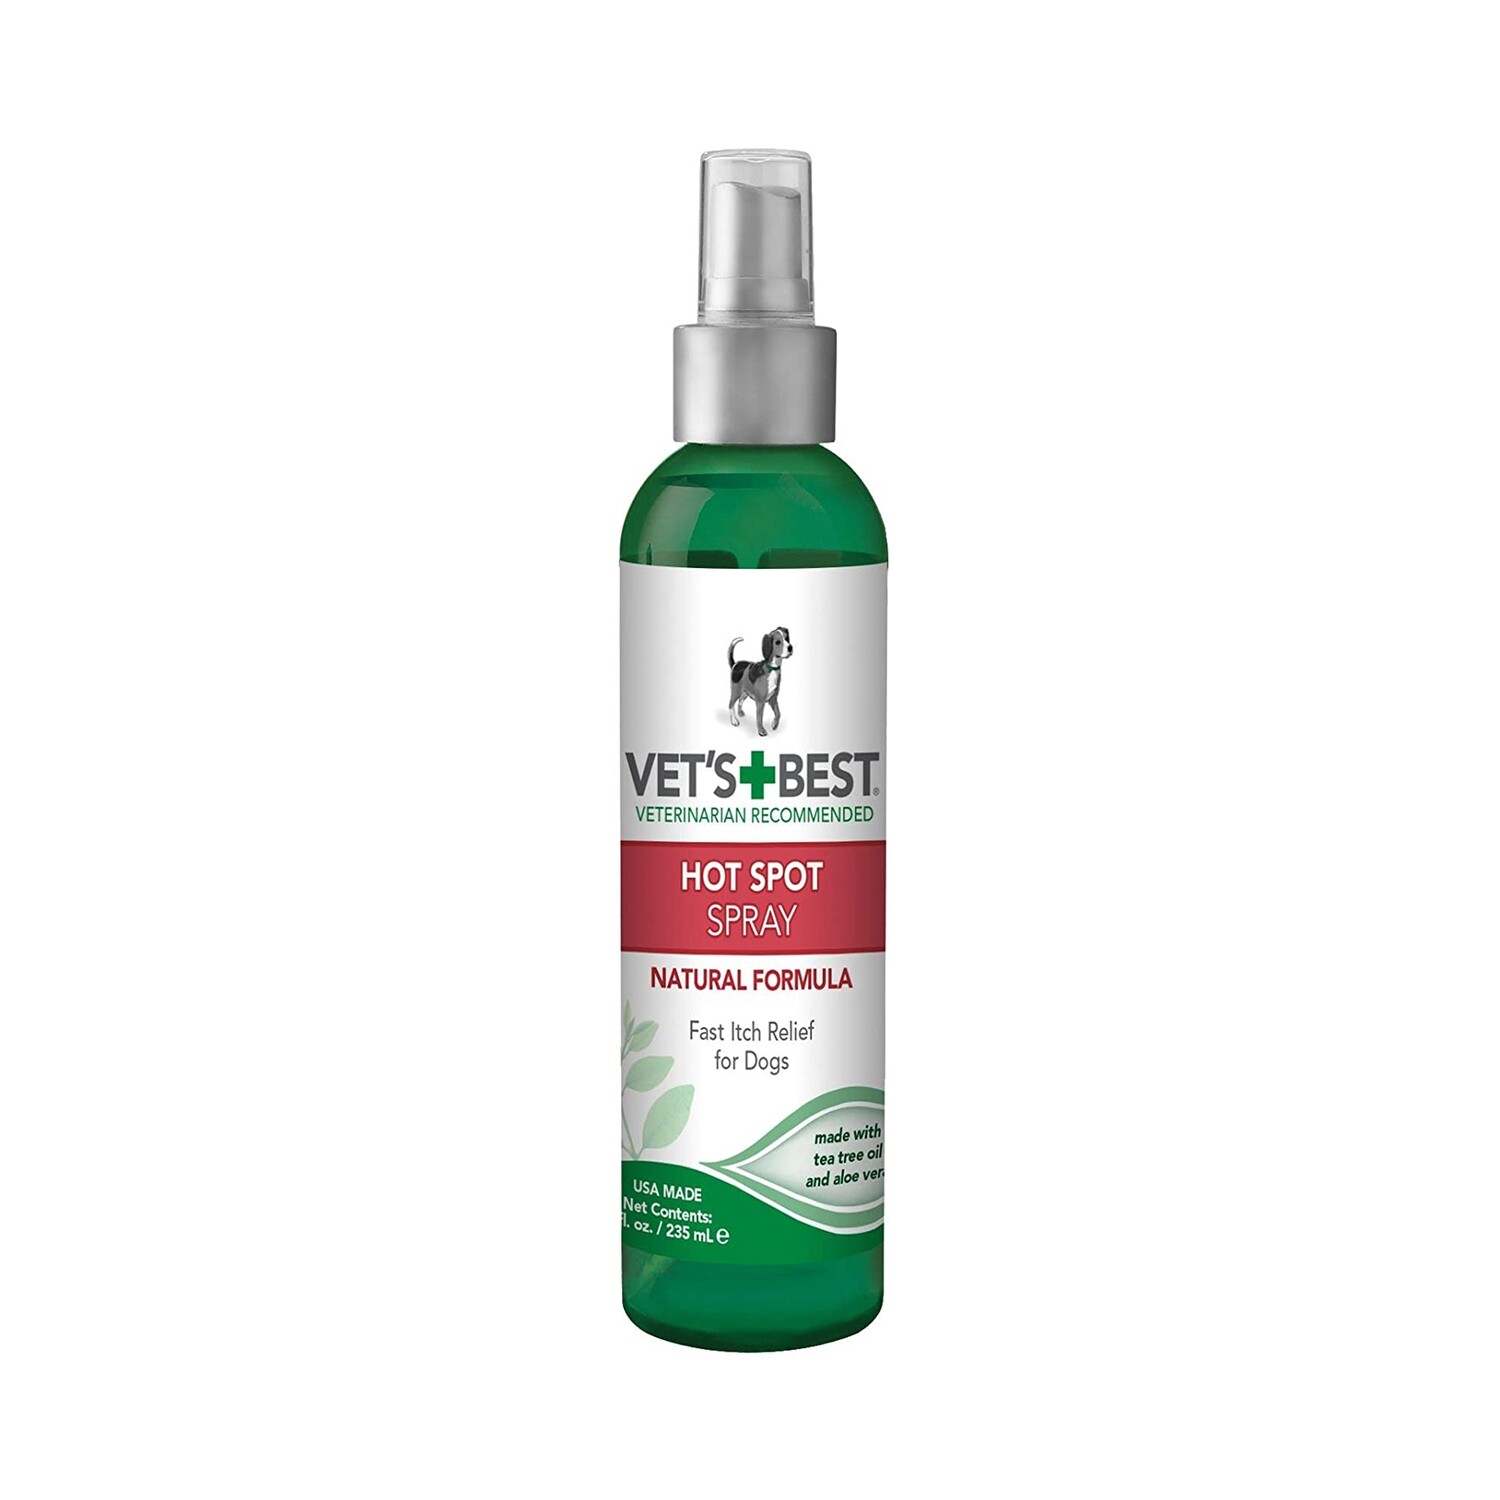 VETS BEST ALLERGY ITCH RELIEF SPRAY FOR DOG - 绿十字减缓皮肤瘙痒喷雾 犬用